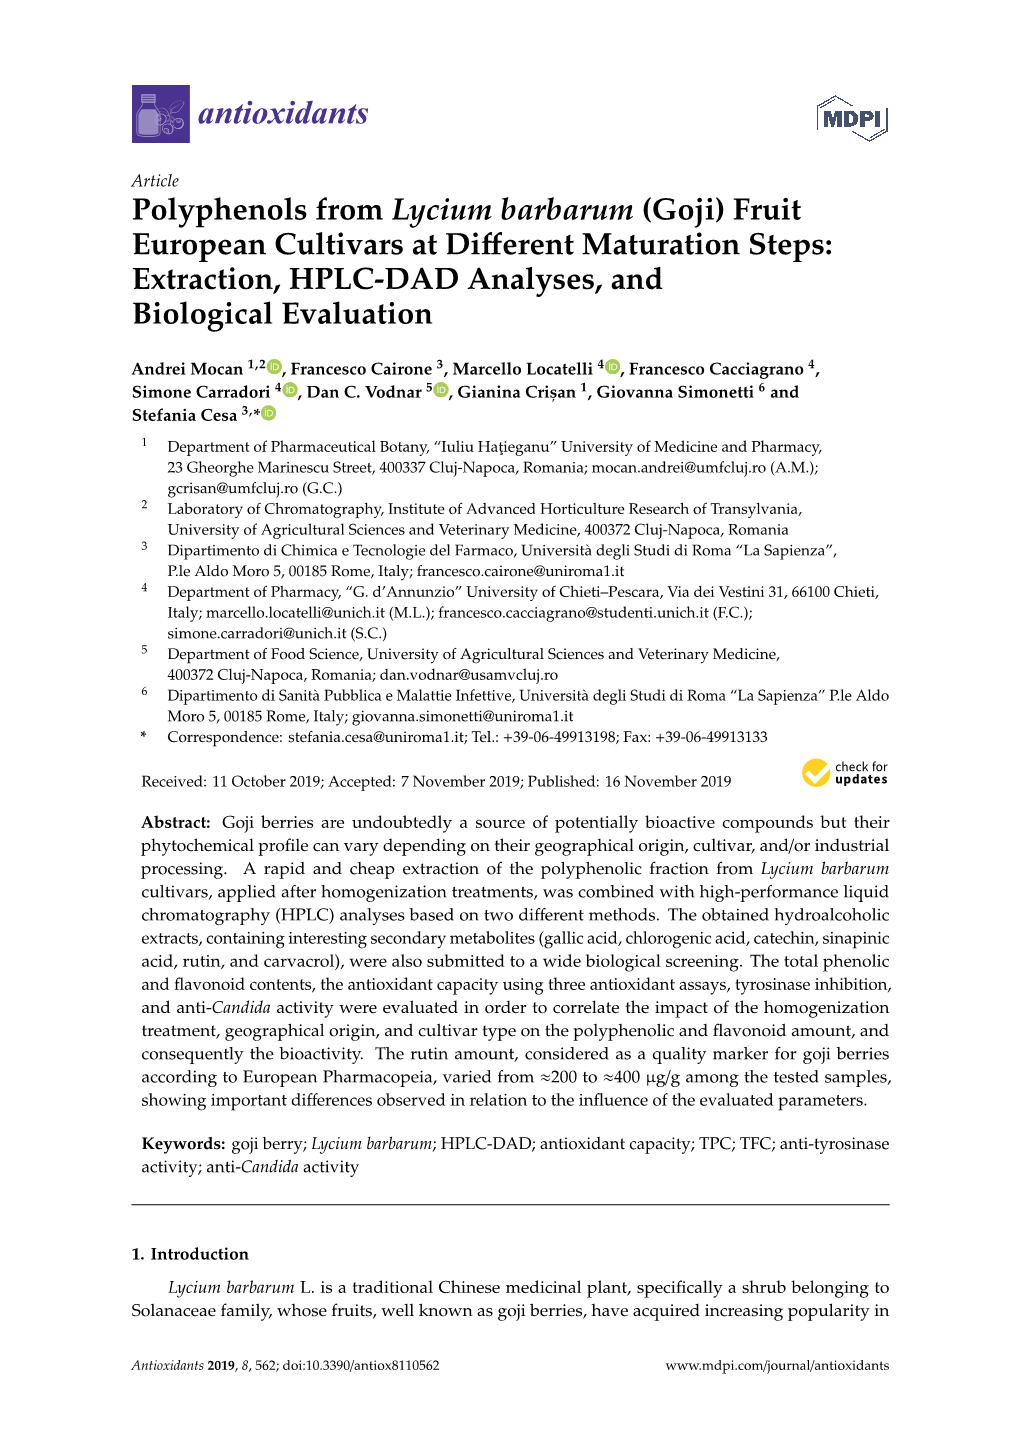 Polyphenols from Lycium Barbarum (Goji) Fruit European Cultivars at Diﬀerent Maturation Steps: Extraction, HPLC-DAD Analyses, and Biological Evaluation